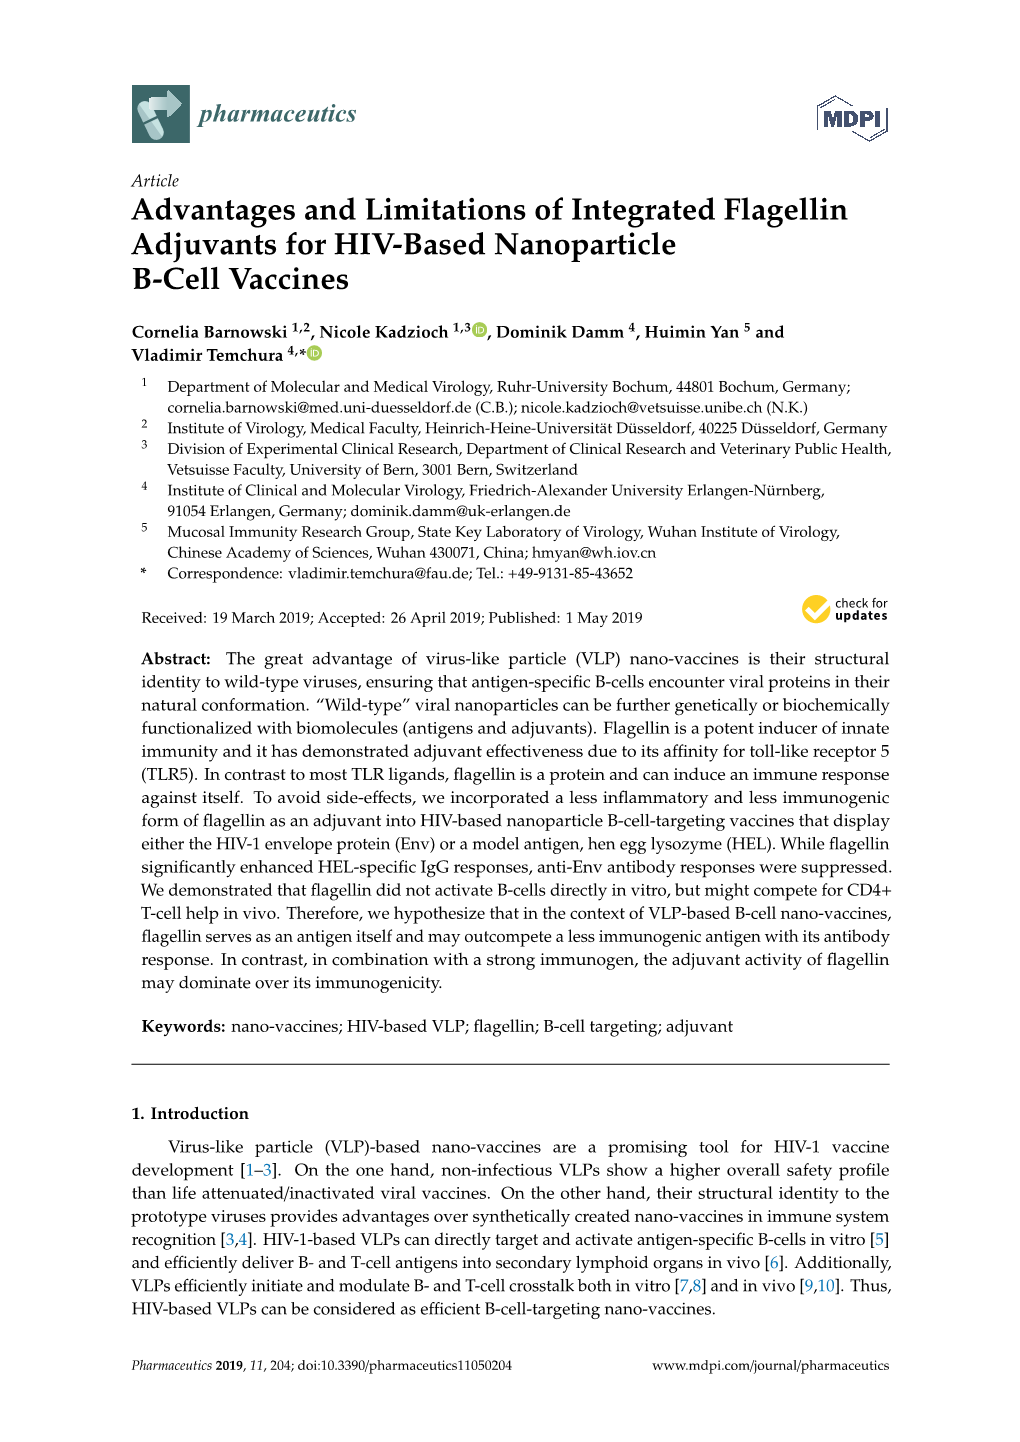 Advantages and Limitations of Integrated Flagellin Adjuvants for HIV-Based Nanoparticle B-Cell Vaccines